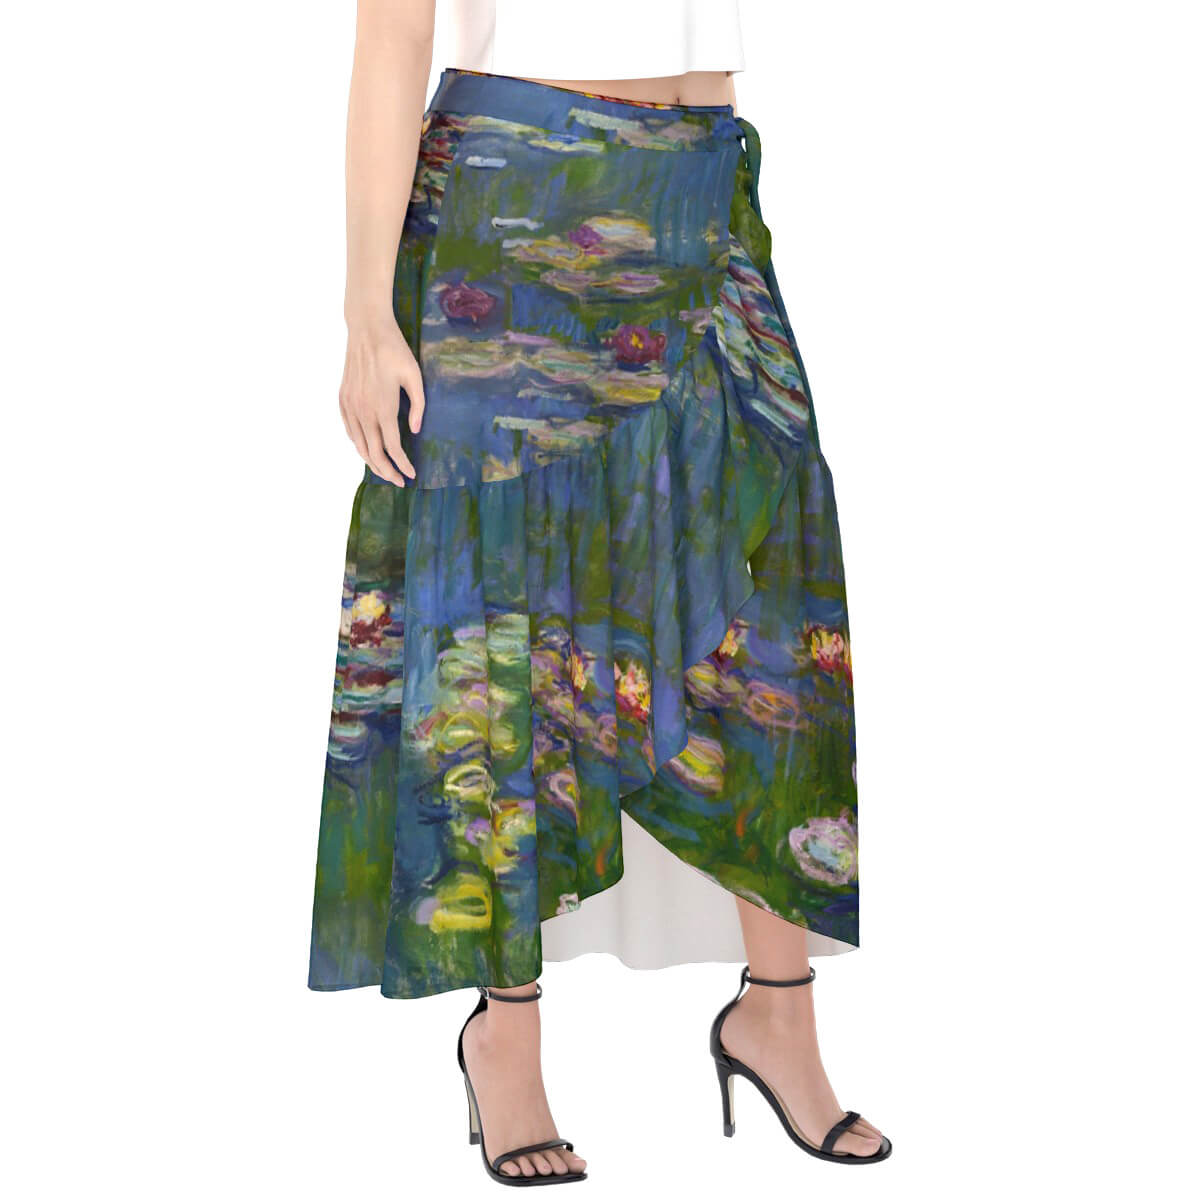 Magical Claude Monet-inspired Clothing